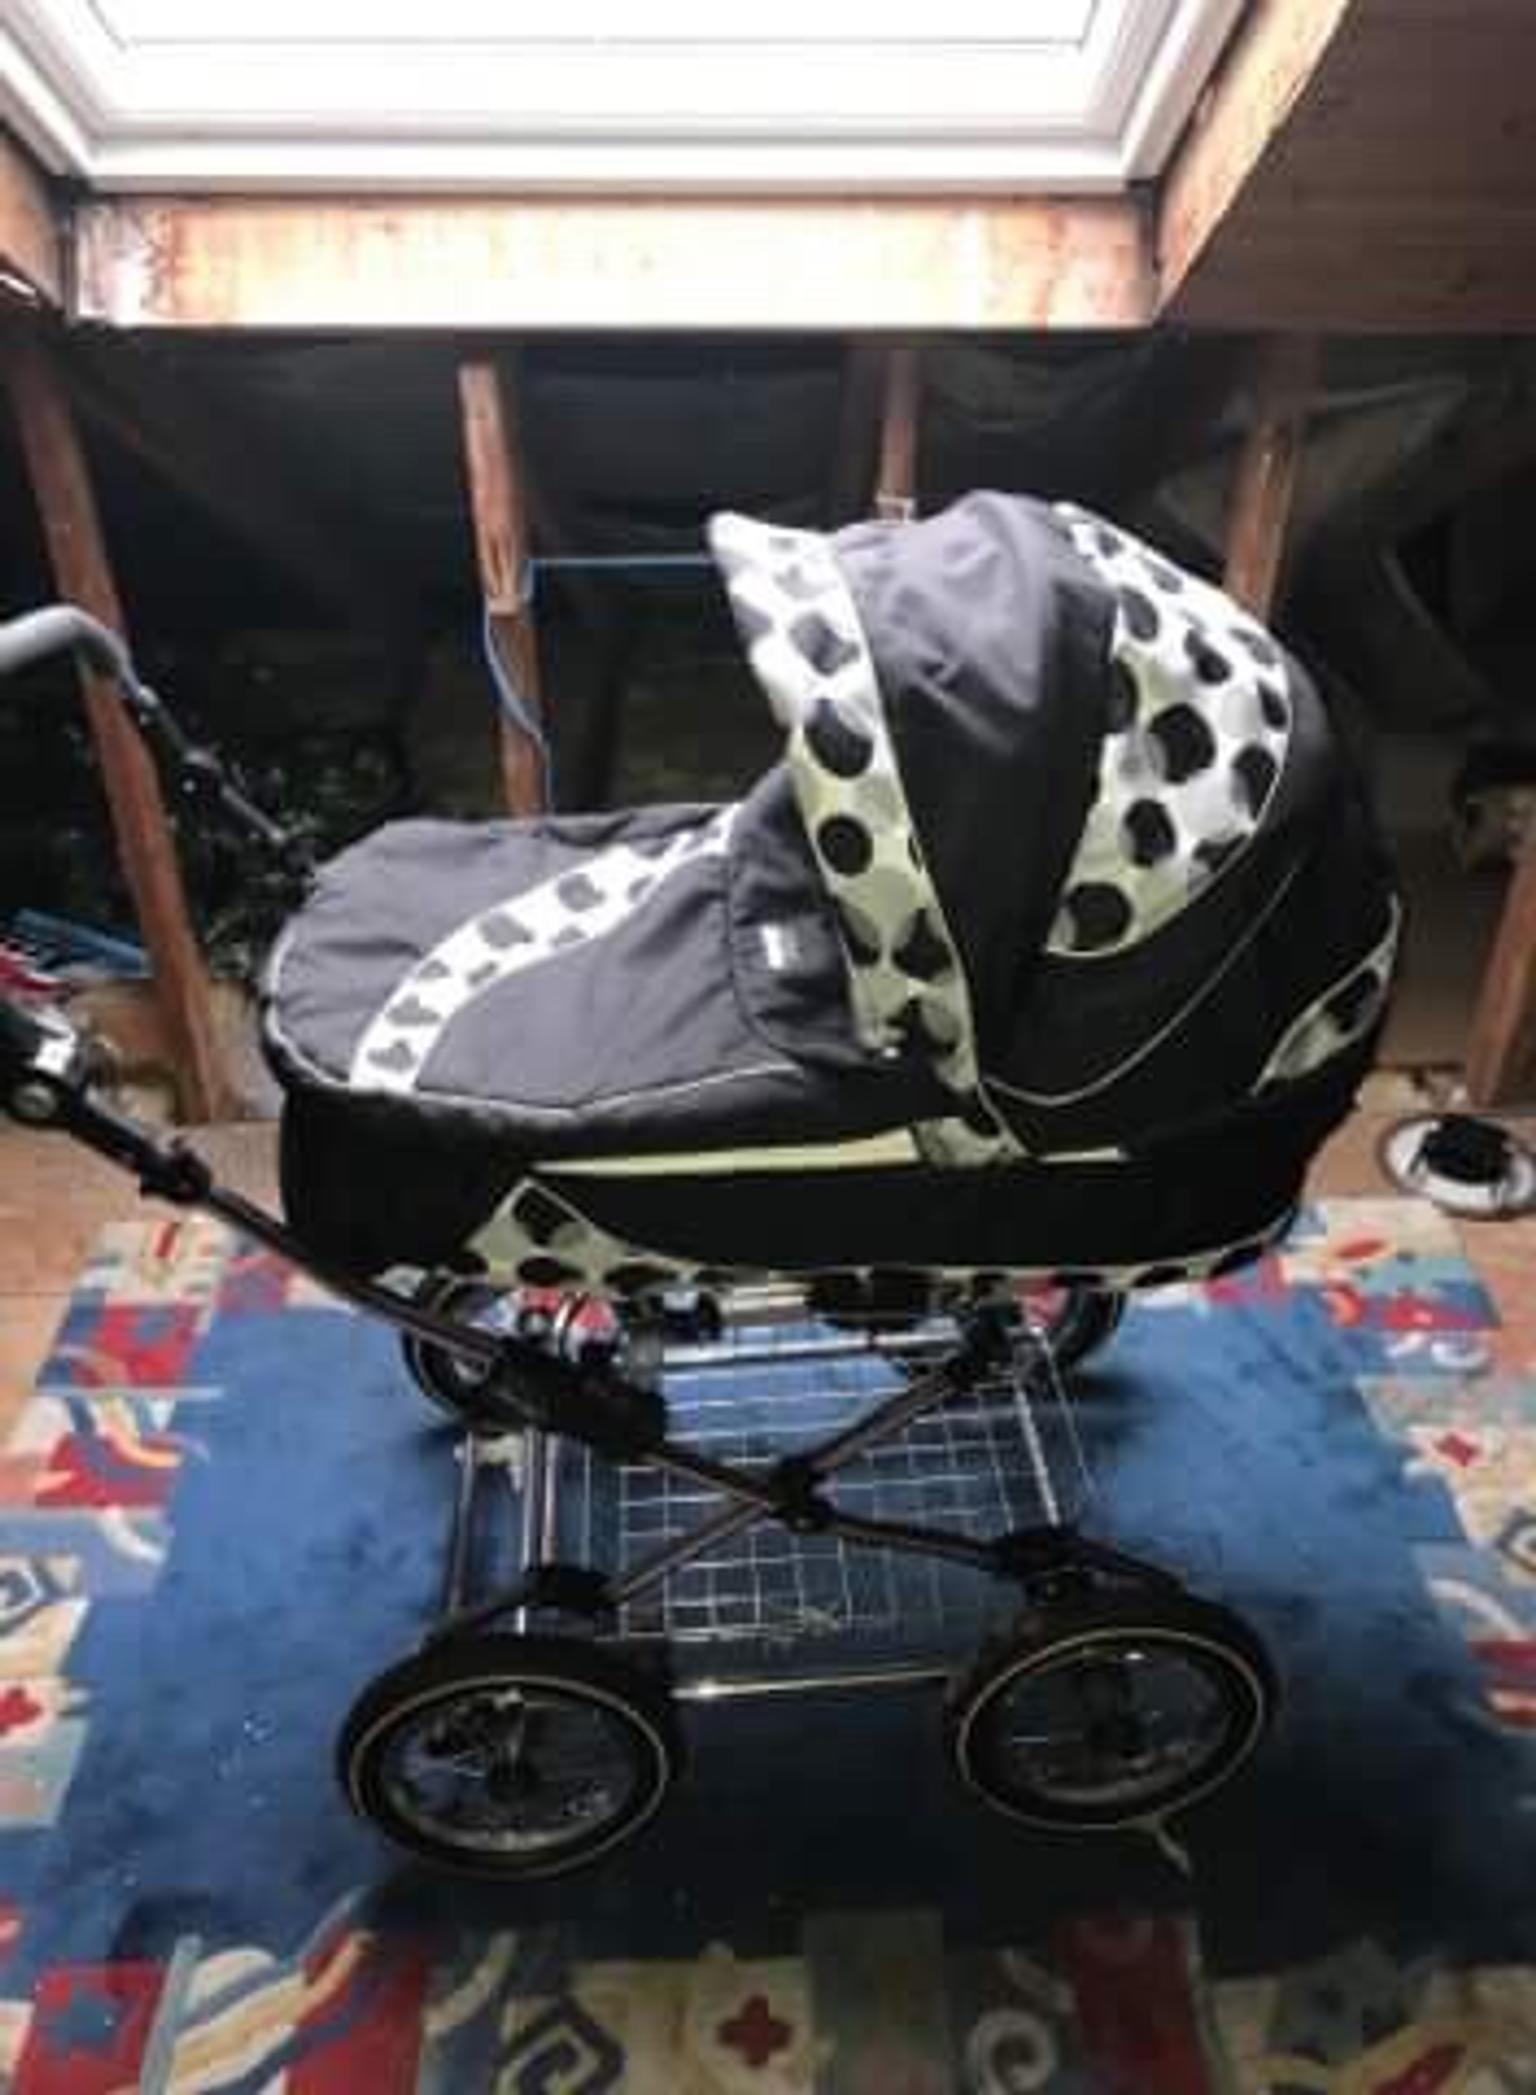 babystyle lux 3in1 pram